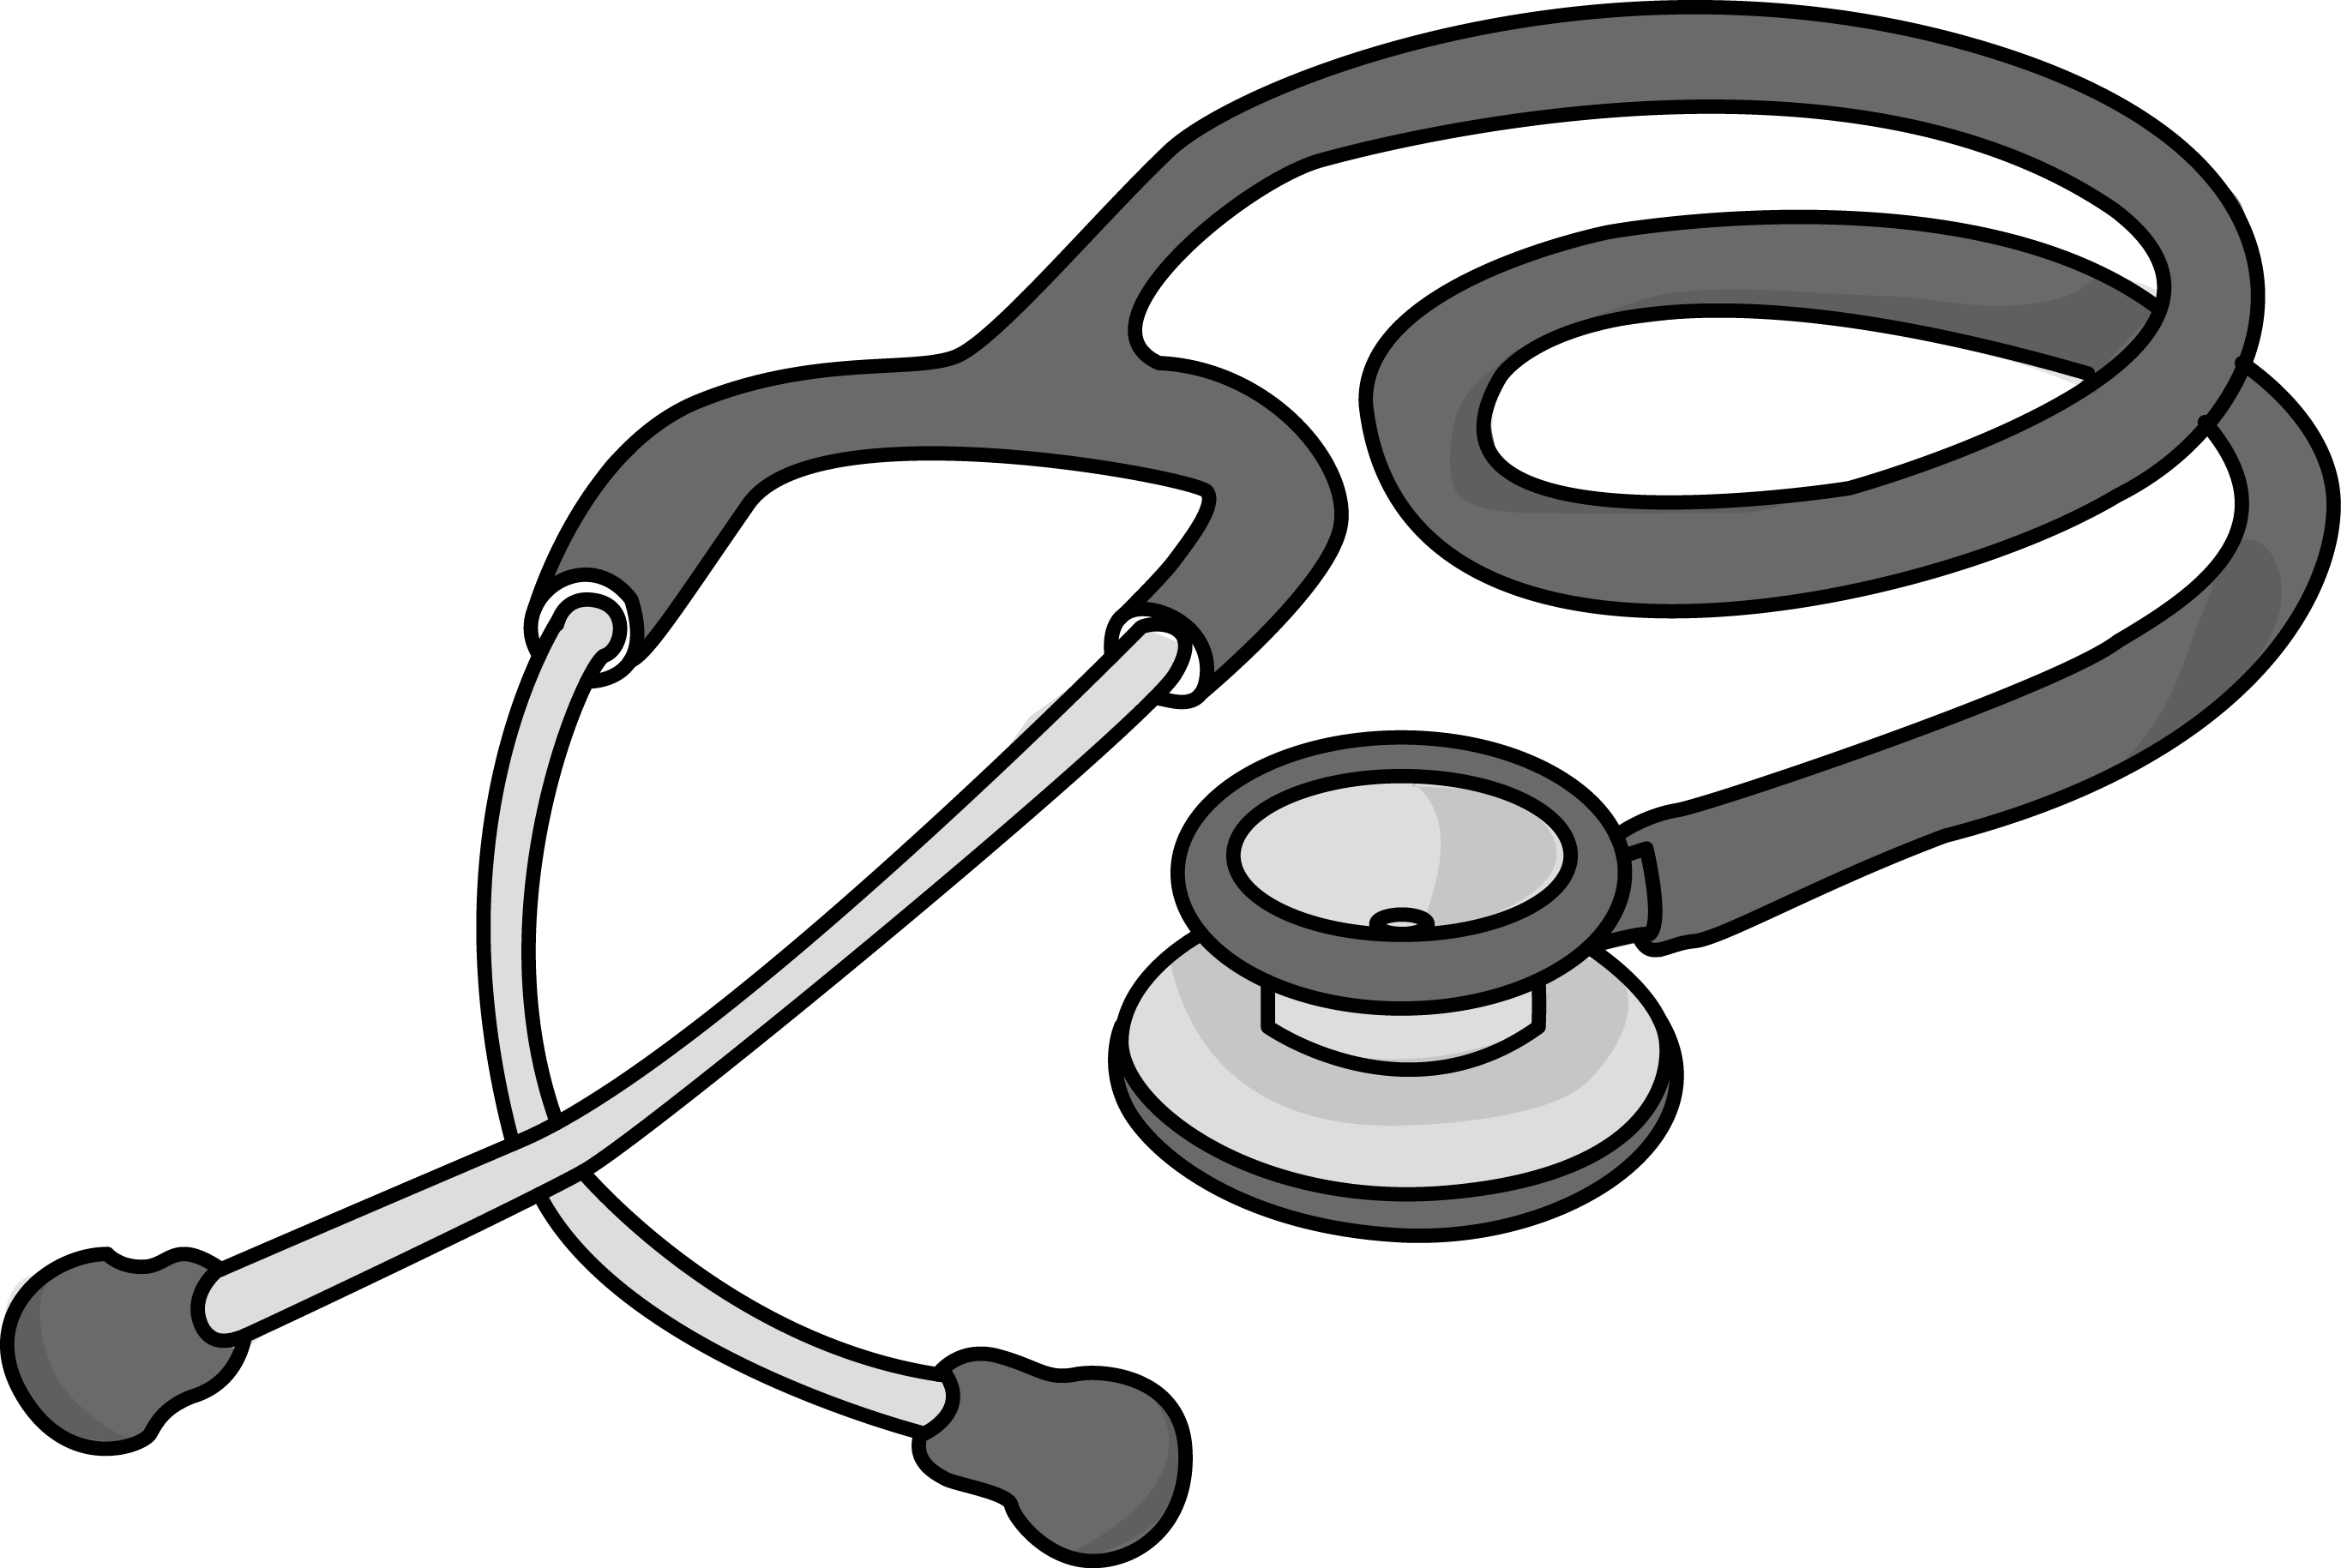  collection of black. Ekg clipart stethoscope